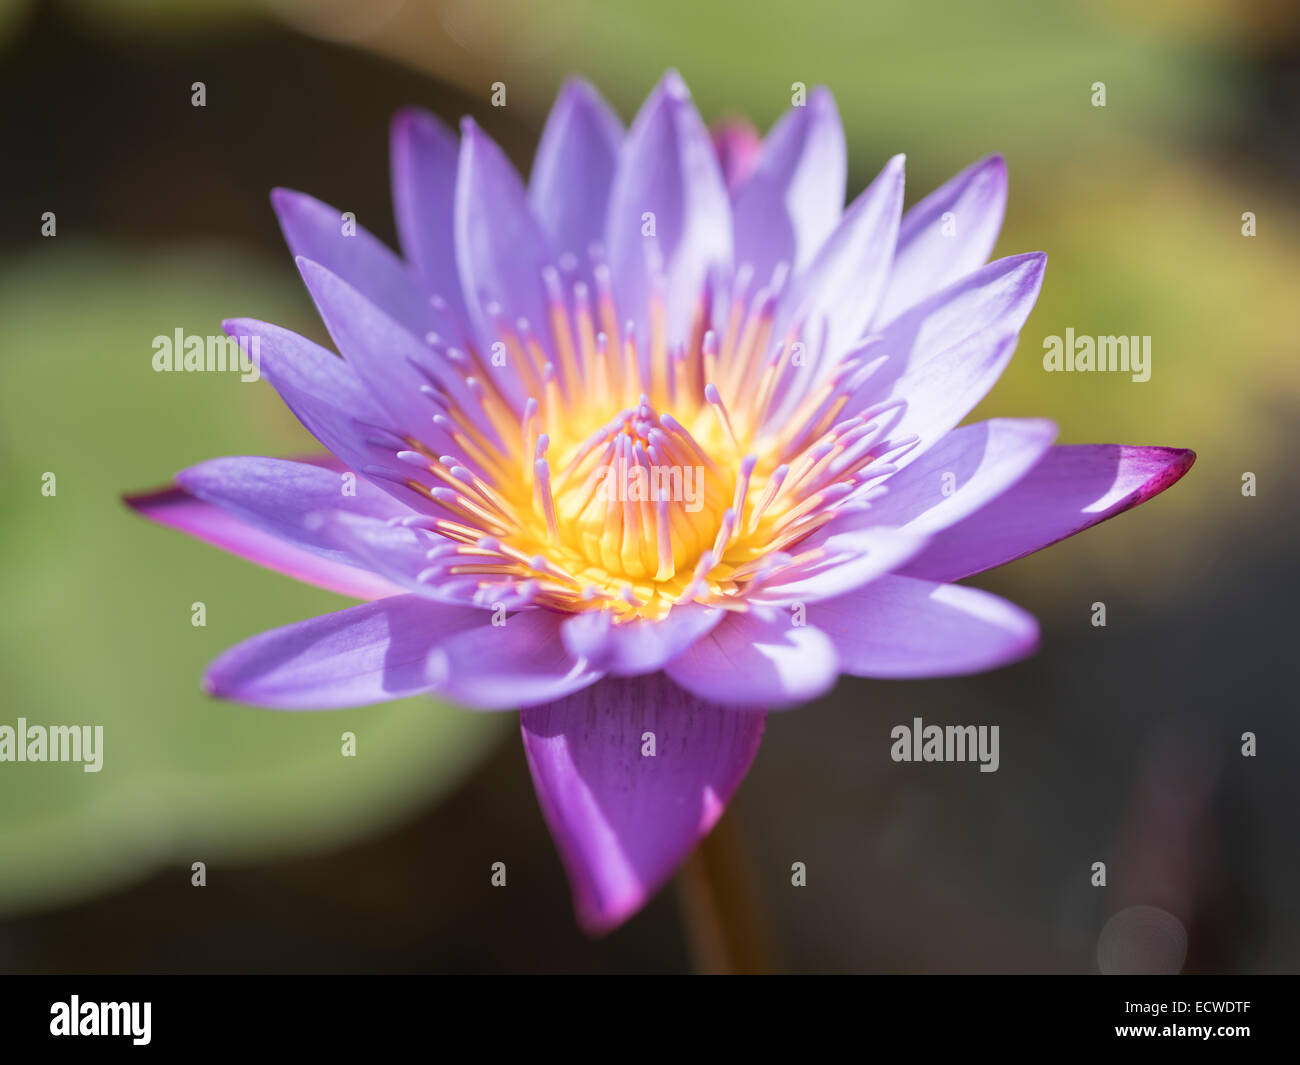 Water lily, Nymphaeaceae, water lilies, flower Stock Photo